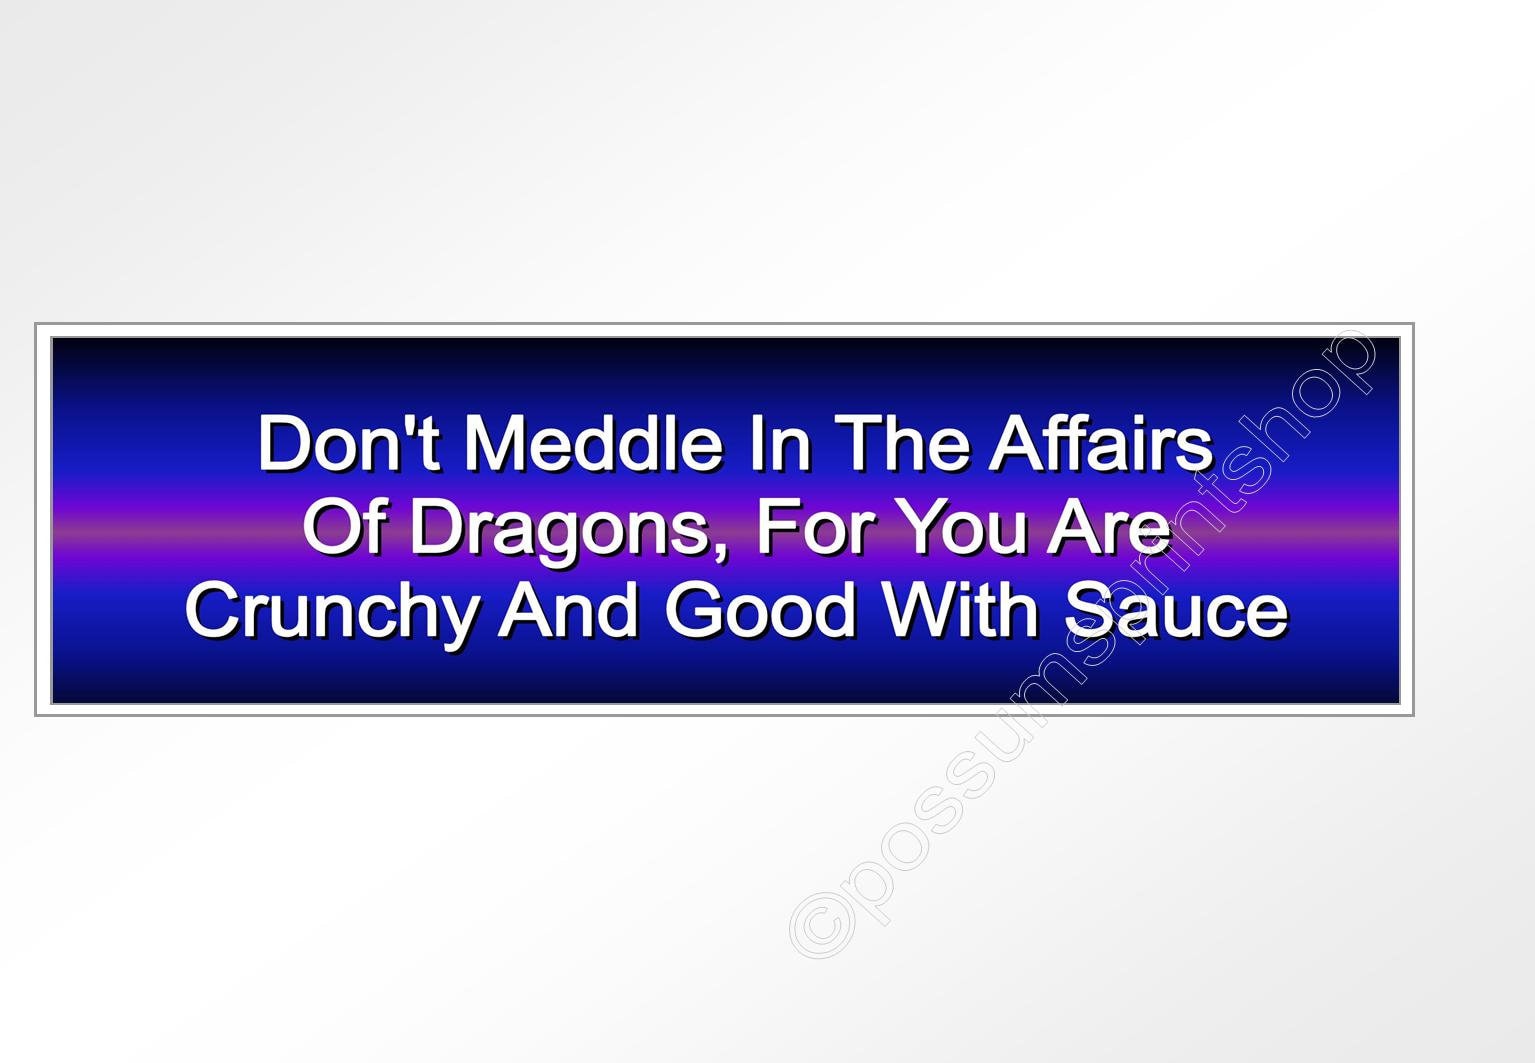 Dragon Car Decal Do Not Meddle in the affairs of Dragons vinyl window sticker